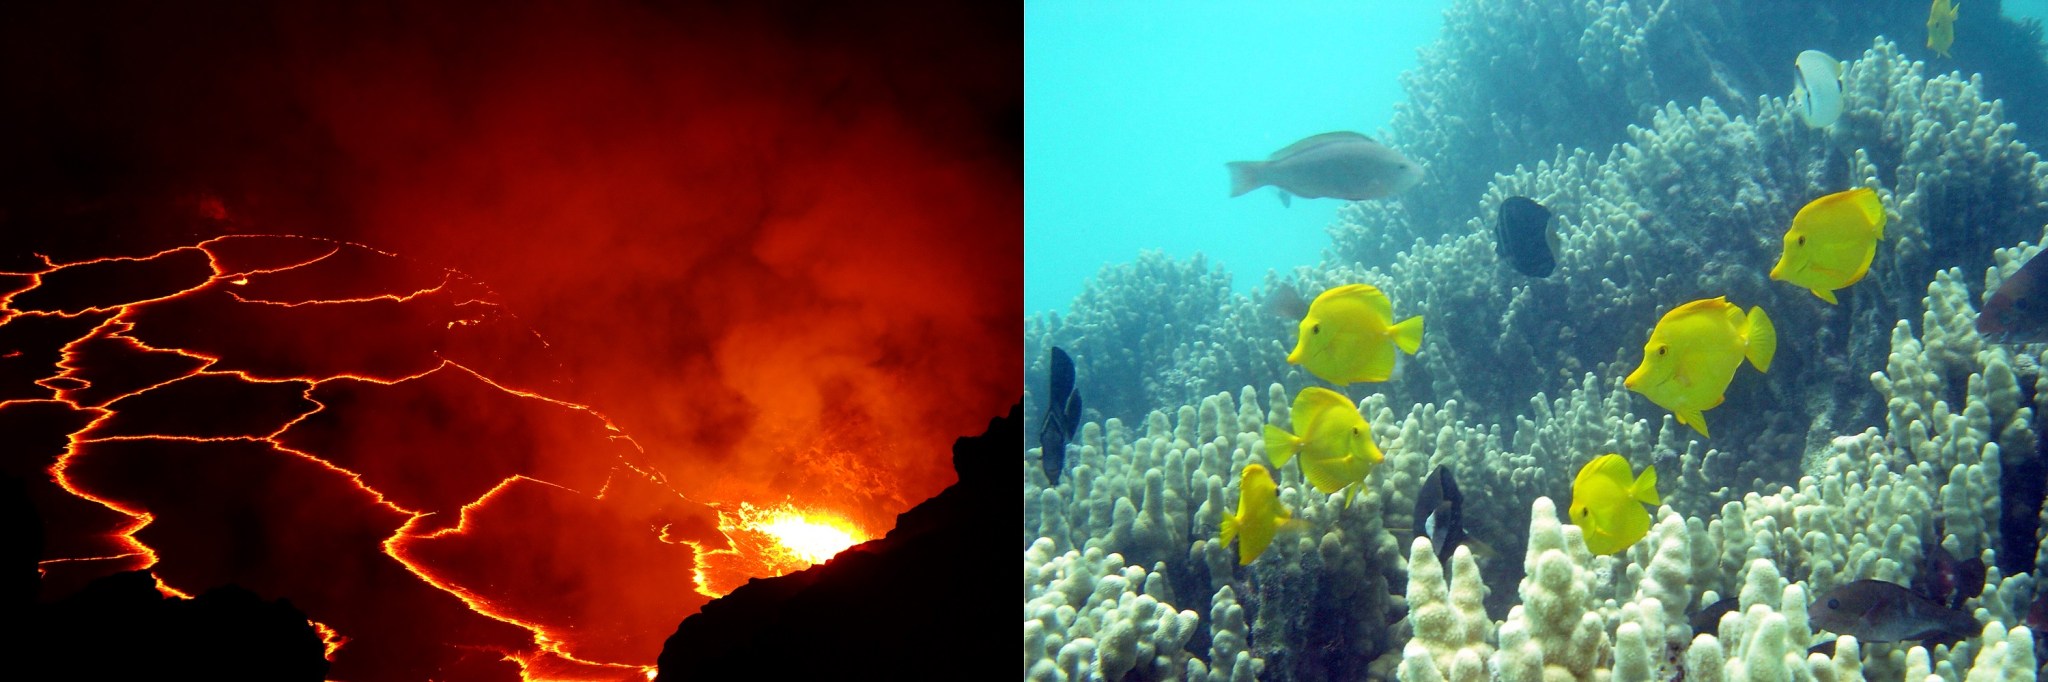 In February 2017, scientists begin collecting data on coral reef health and volcanic emissions and eruptions in Hawaii.